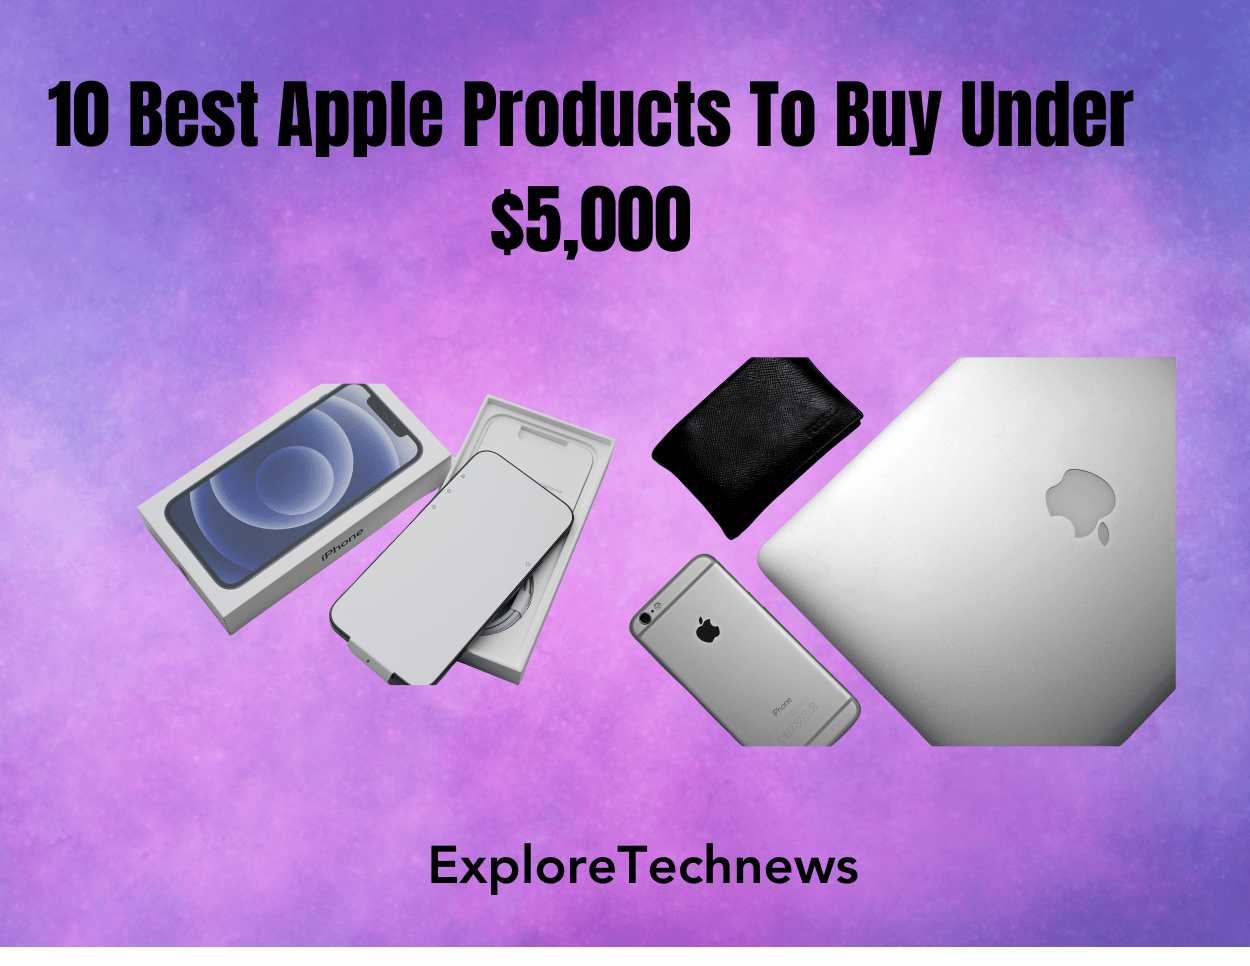 10 Best Apple Products To Buy Under $5,000